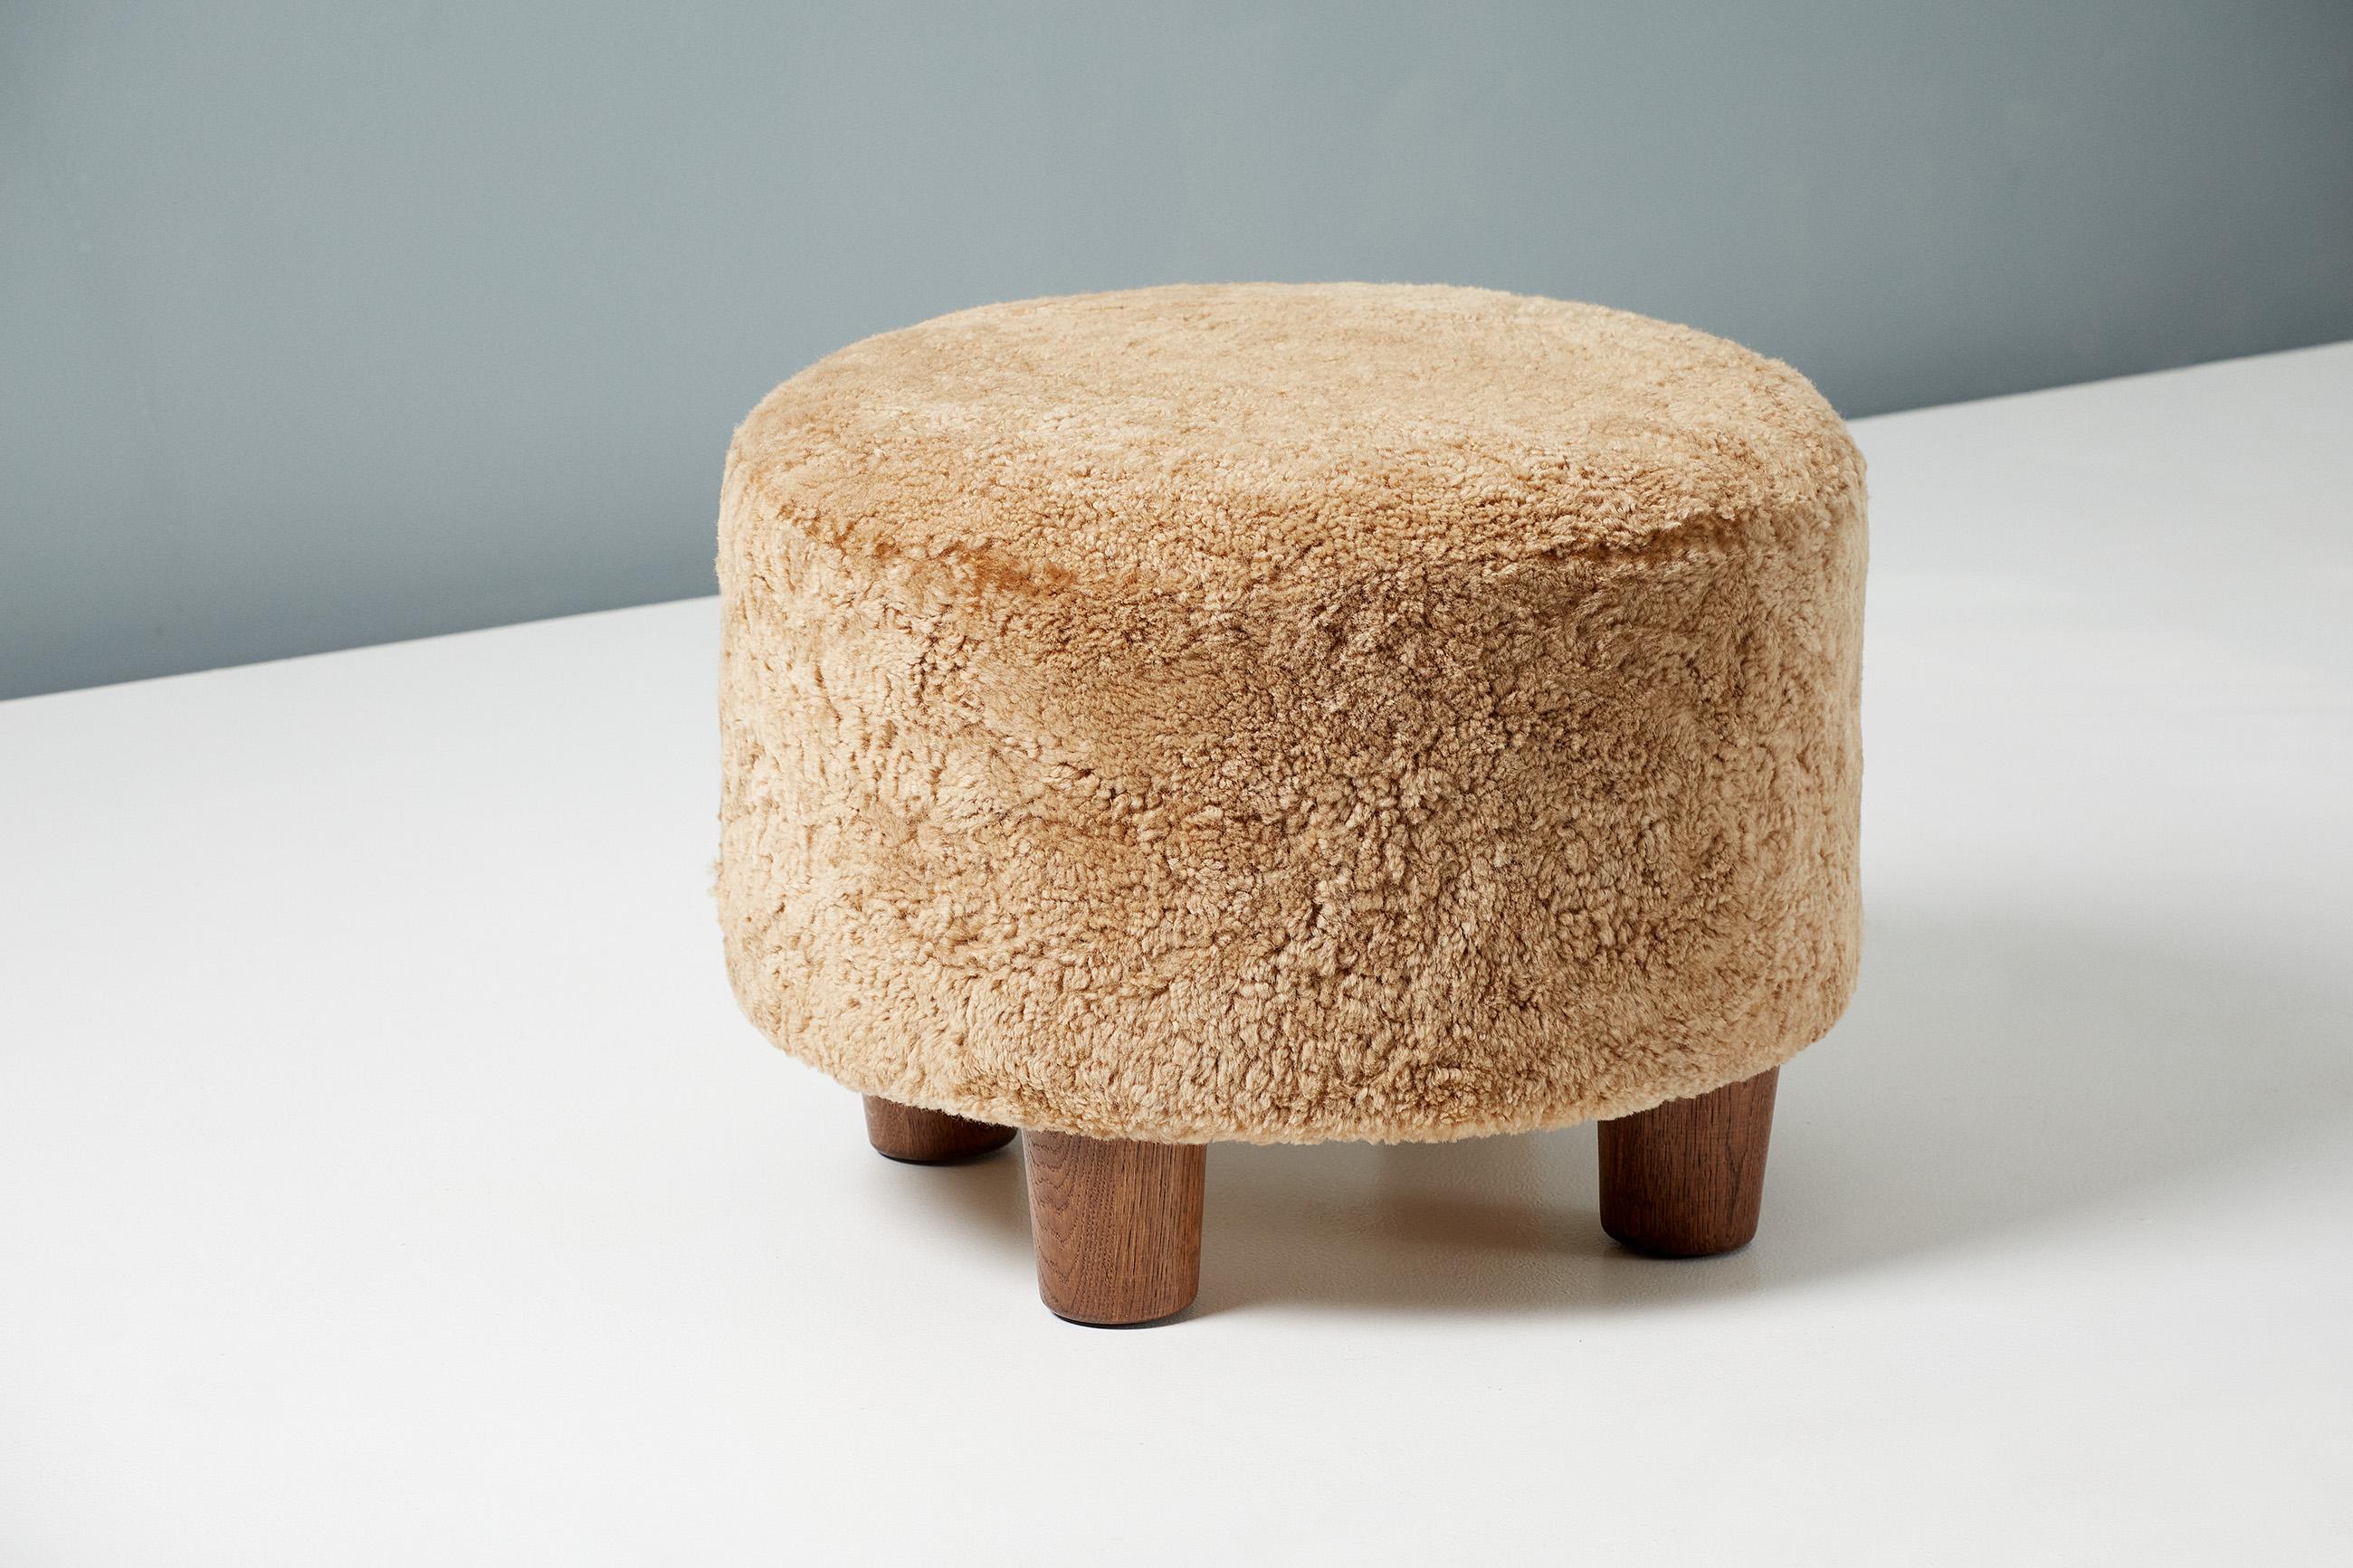 Custom-made ottomans developed & produced at our workshops in London using the highest quality materials. These examples are upholstered in a 'Maple' sheepskin and feature oiled and fumed oak feet.

A range of other sheepskin, fabric and wood